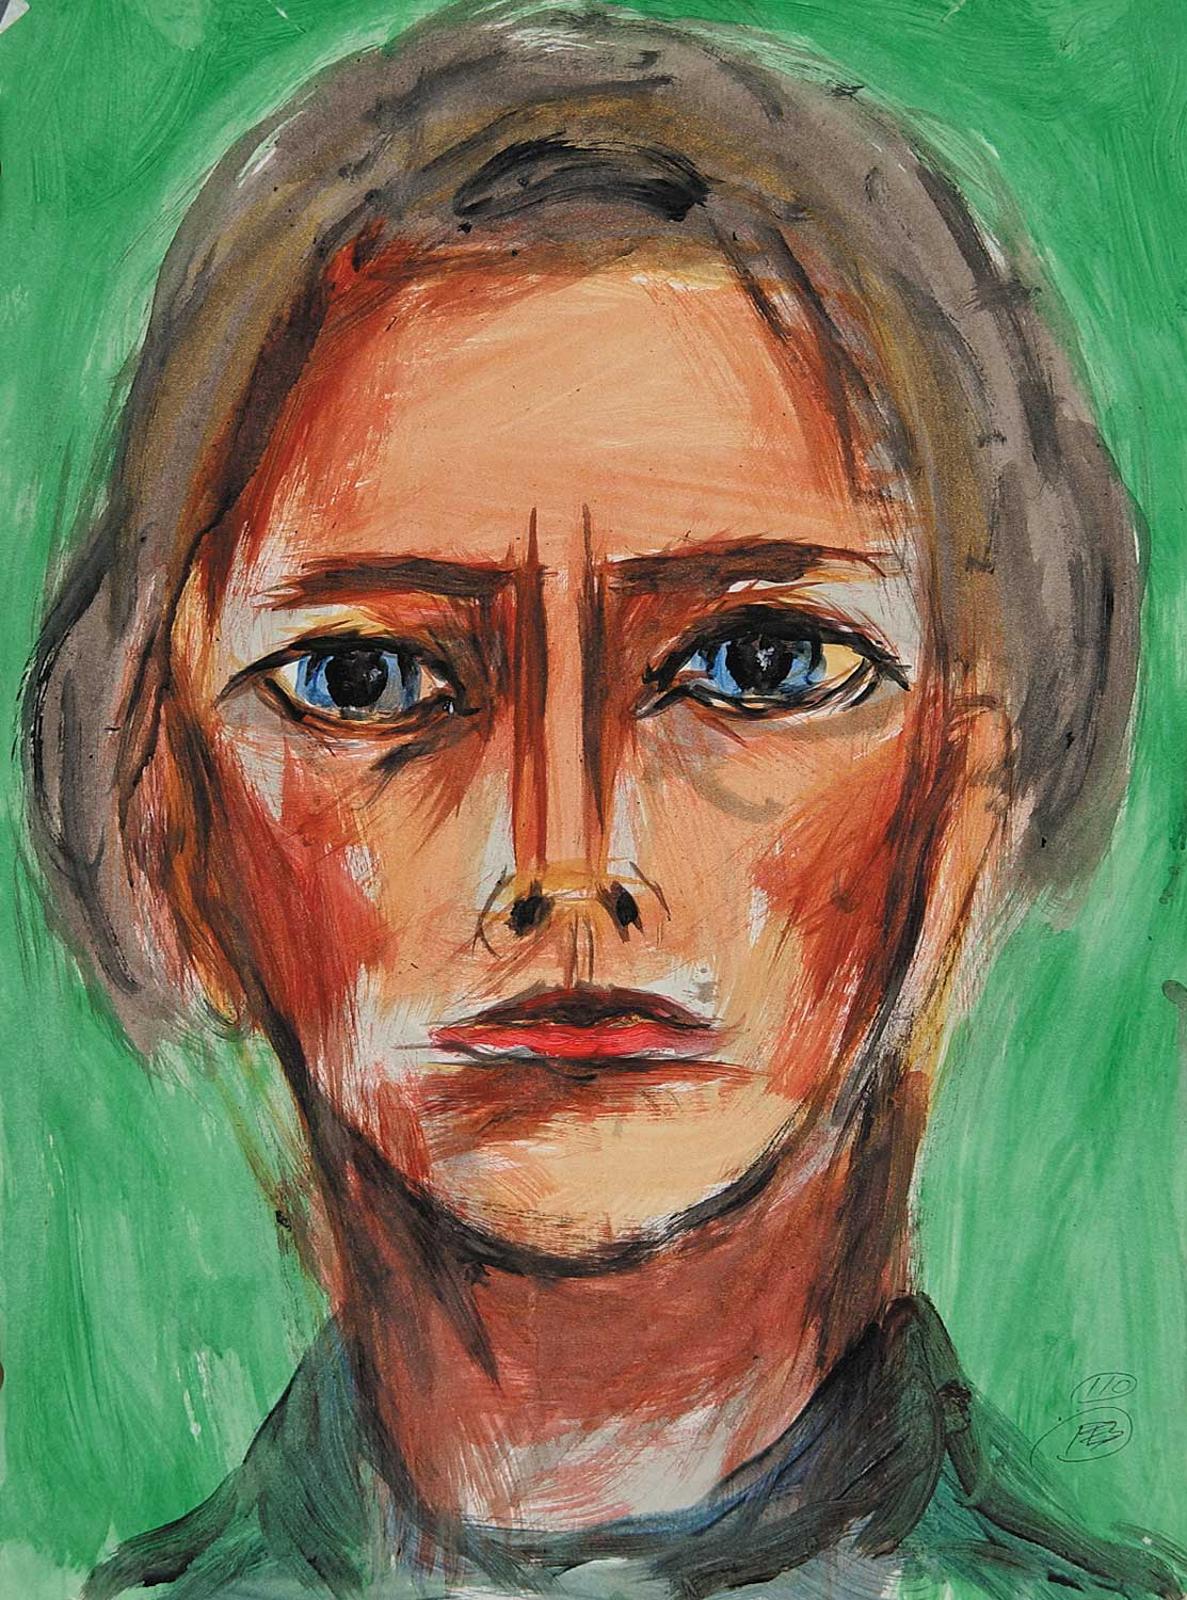 Robert Charles Aller (1922-2008) - Untitled - Woman with Blue Eyes, Red Lips on Green Background